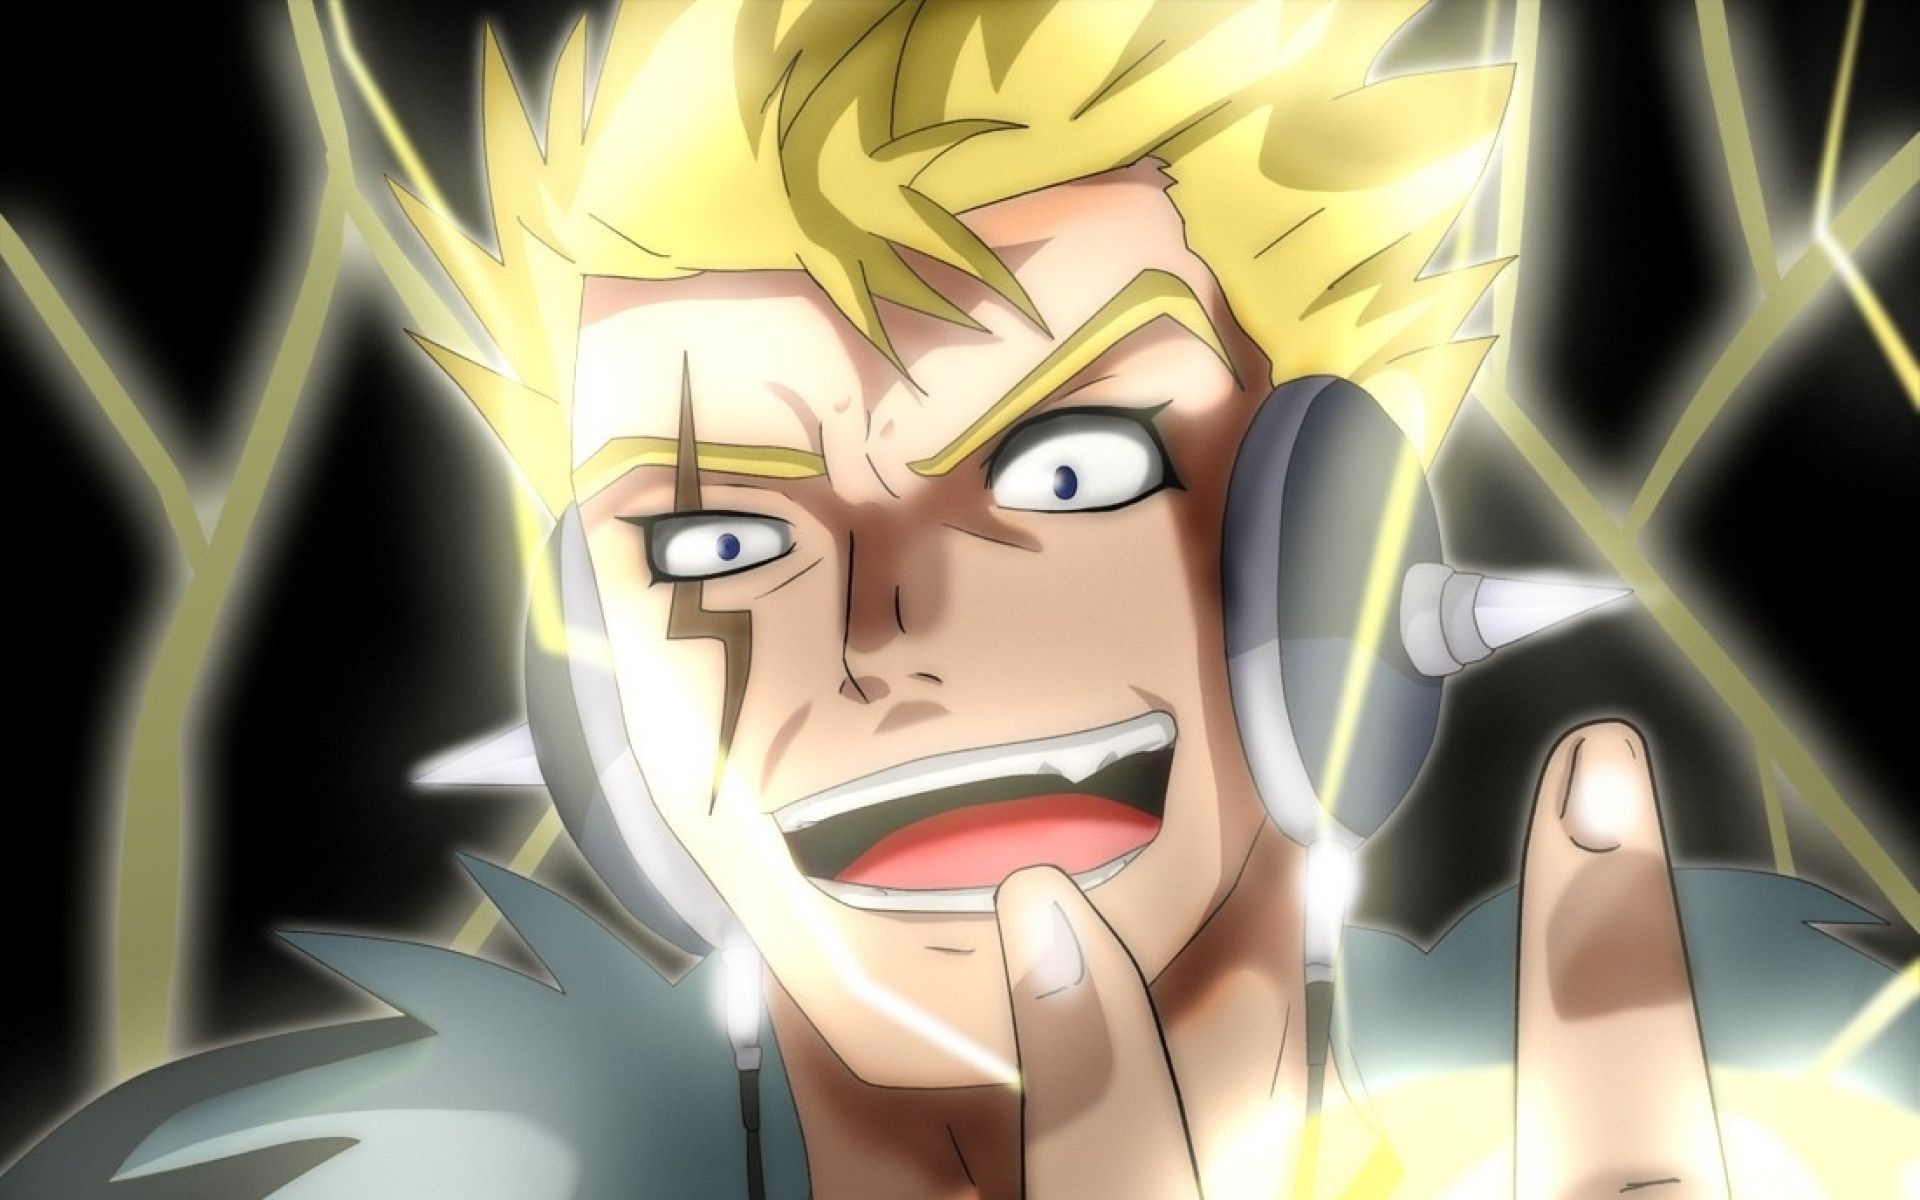 Laxus Dreyar, Top fairy tail wallpapers, Fairy Tail anime, Captivating images, 1920x1200 HD Desktop